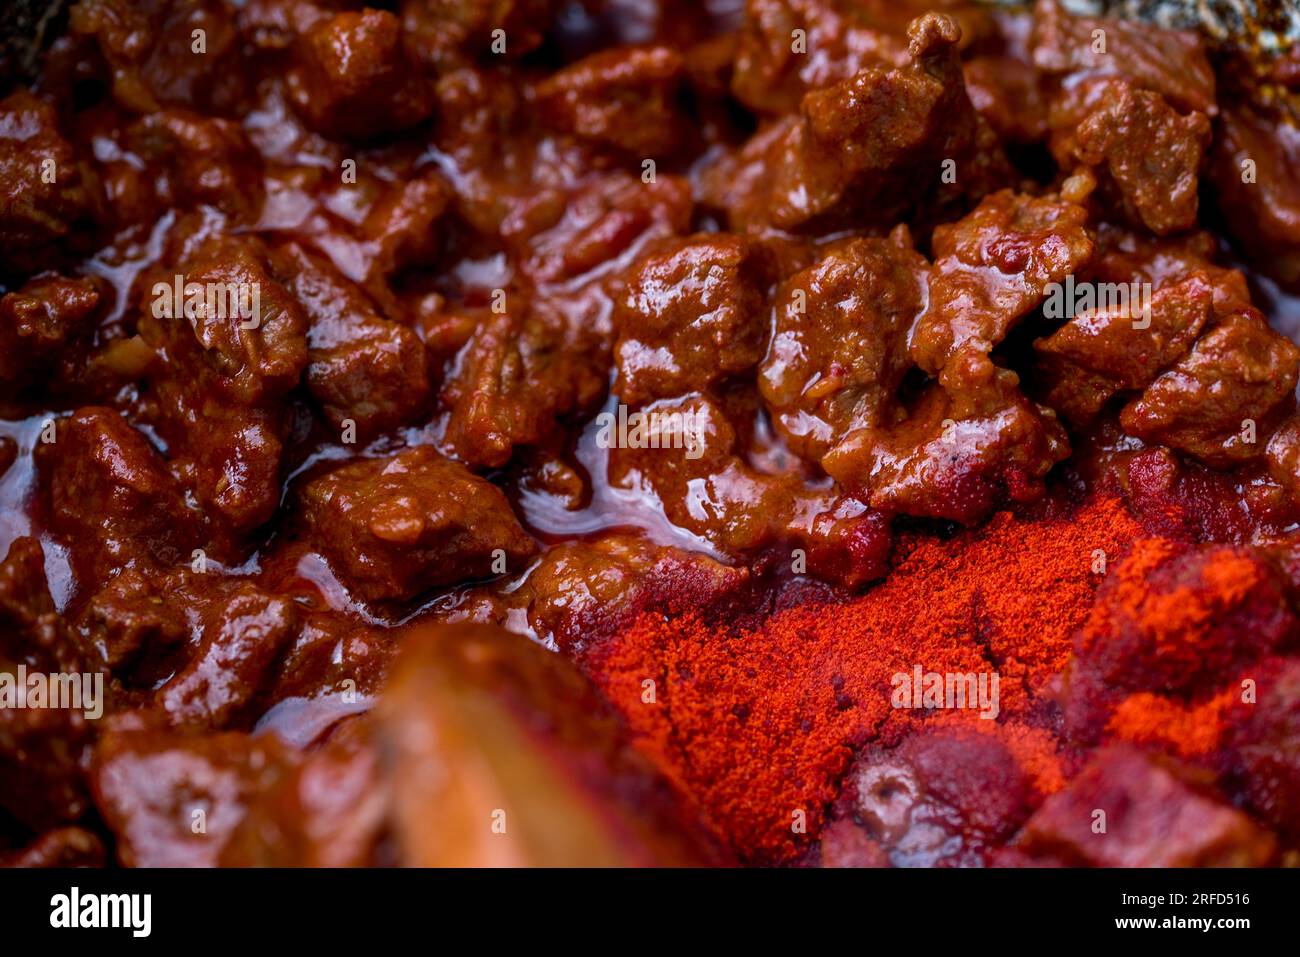 traditional hungarian goulash is boiling in a cauldron. Stock Photo